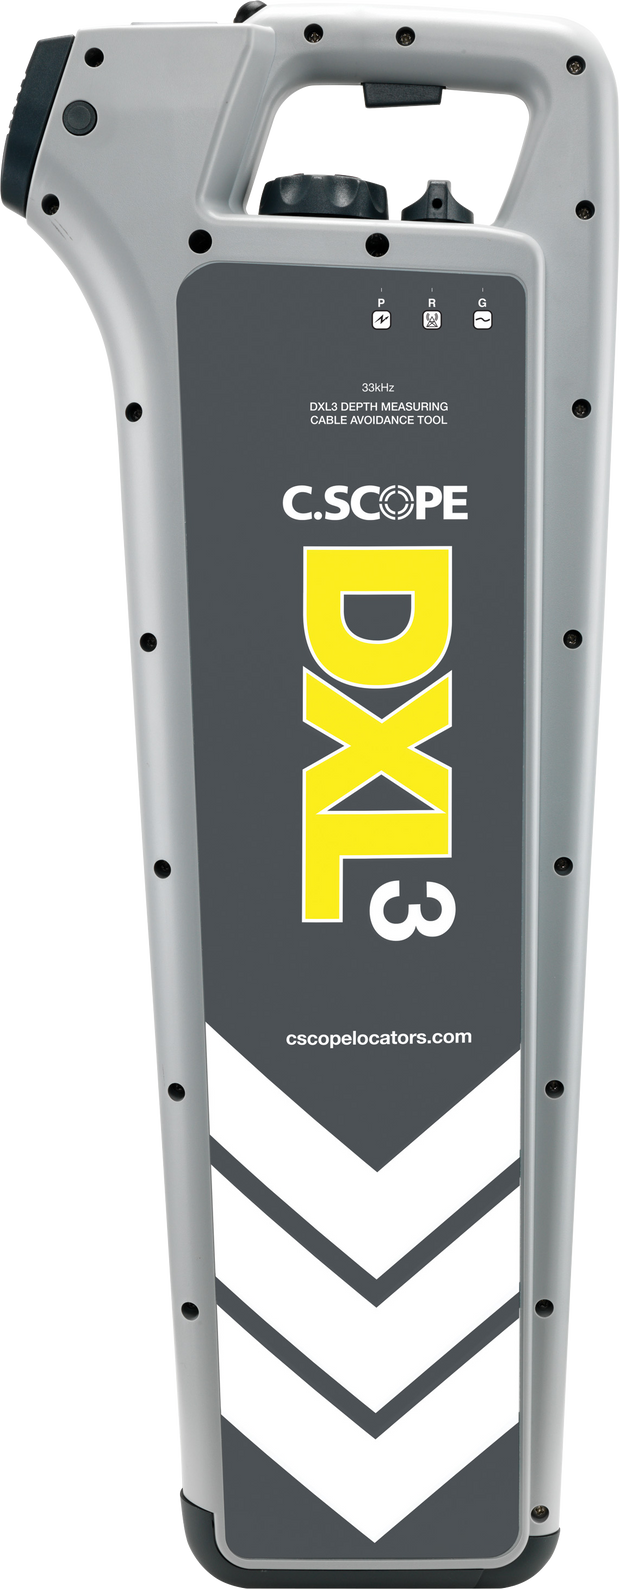 Pipe and Cable Detector DXL3